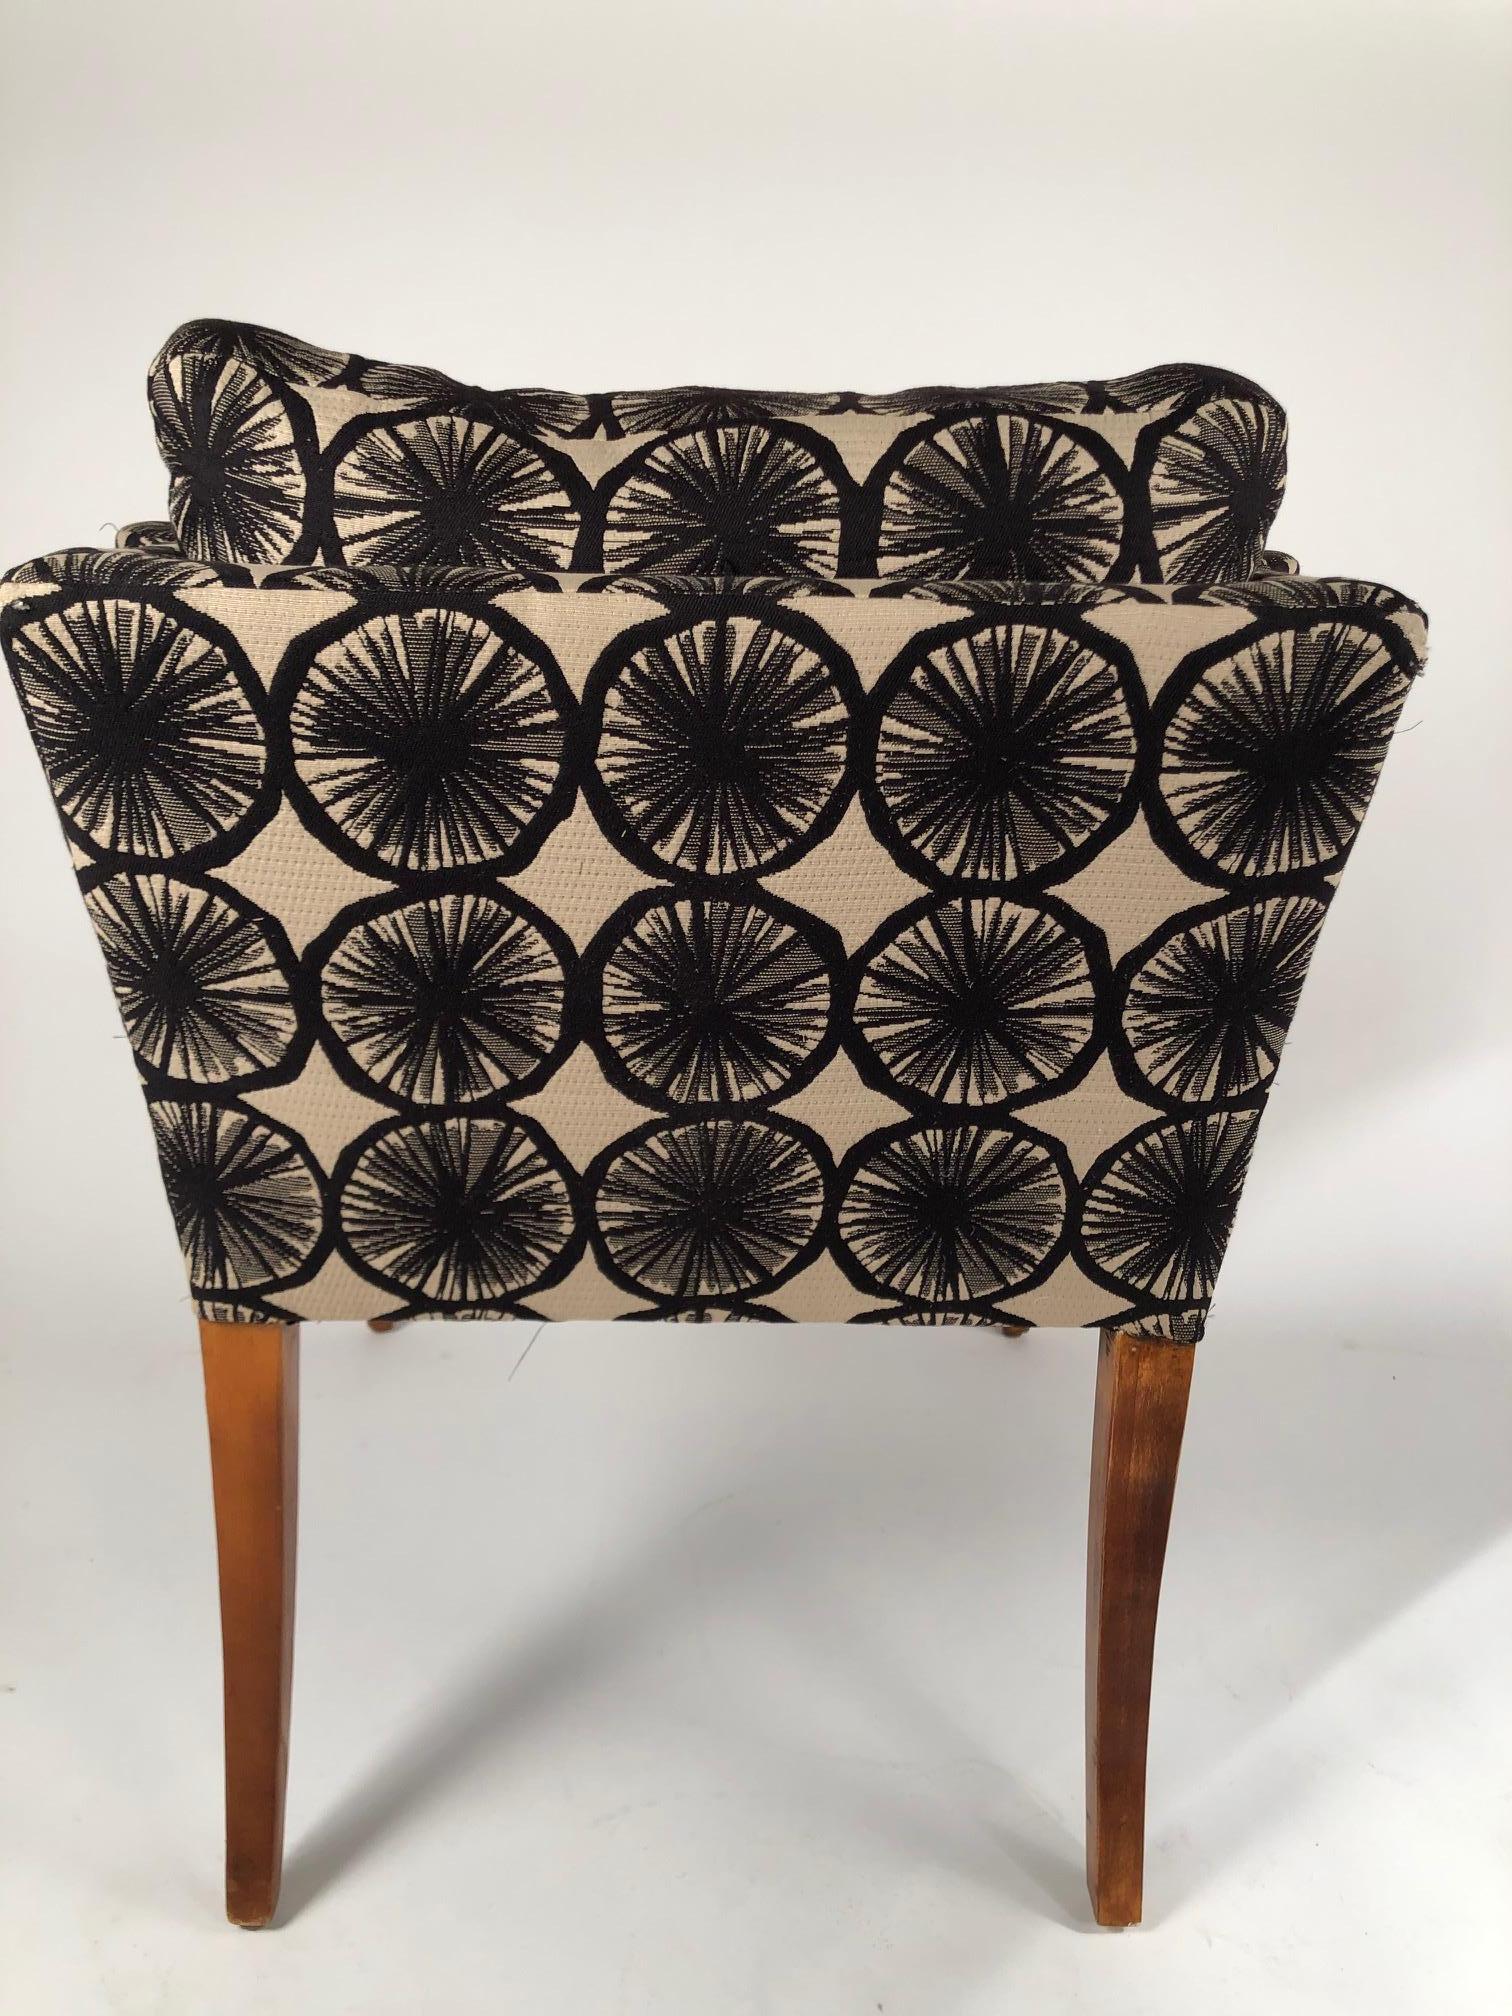 Recently reupholstered with Mokum fabric, this deco beauty is just the right combination of sleek and curvy. A few knicks on legs shown.

Measures: Seat height 19